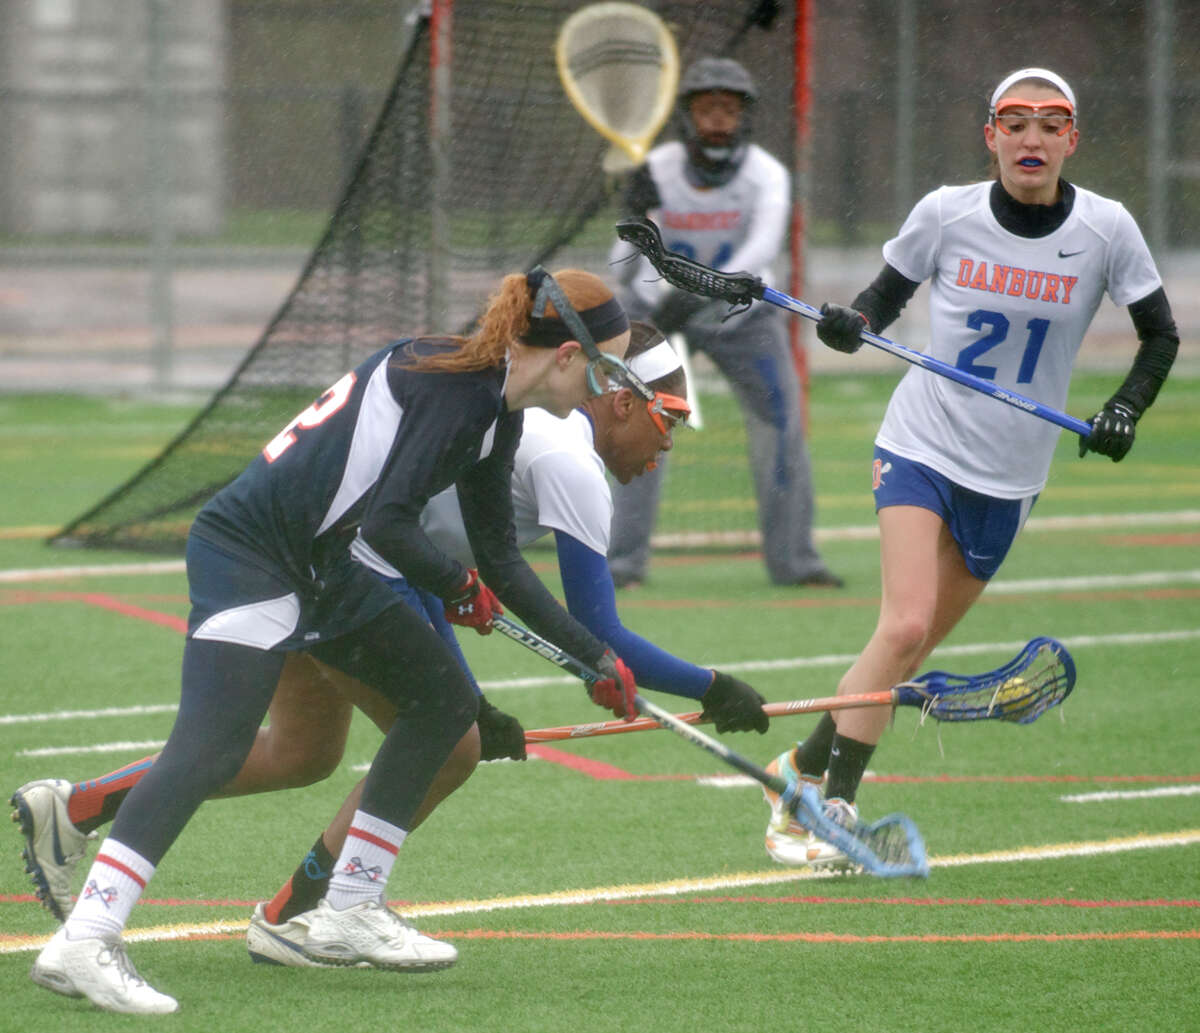 New Fairfield's Danielle Hanley, #22, and Danbury's Najmah James, #2, battle over the ball during the New Fairfield at Danbury High School girls lacrosse game, in Danbury, Conn, on Wednesday, April 30, 2014. Behind them are Danbury's Brittany Kenyon, #21, and goalie Ketsia Lefranc, 324.